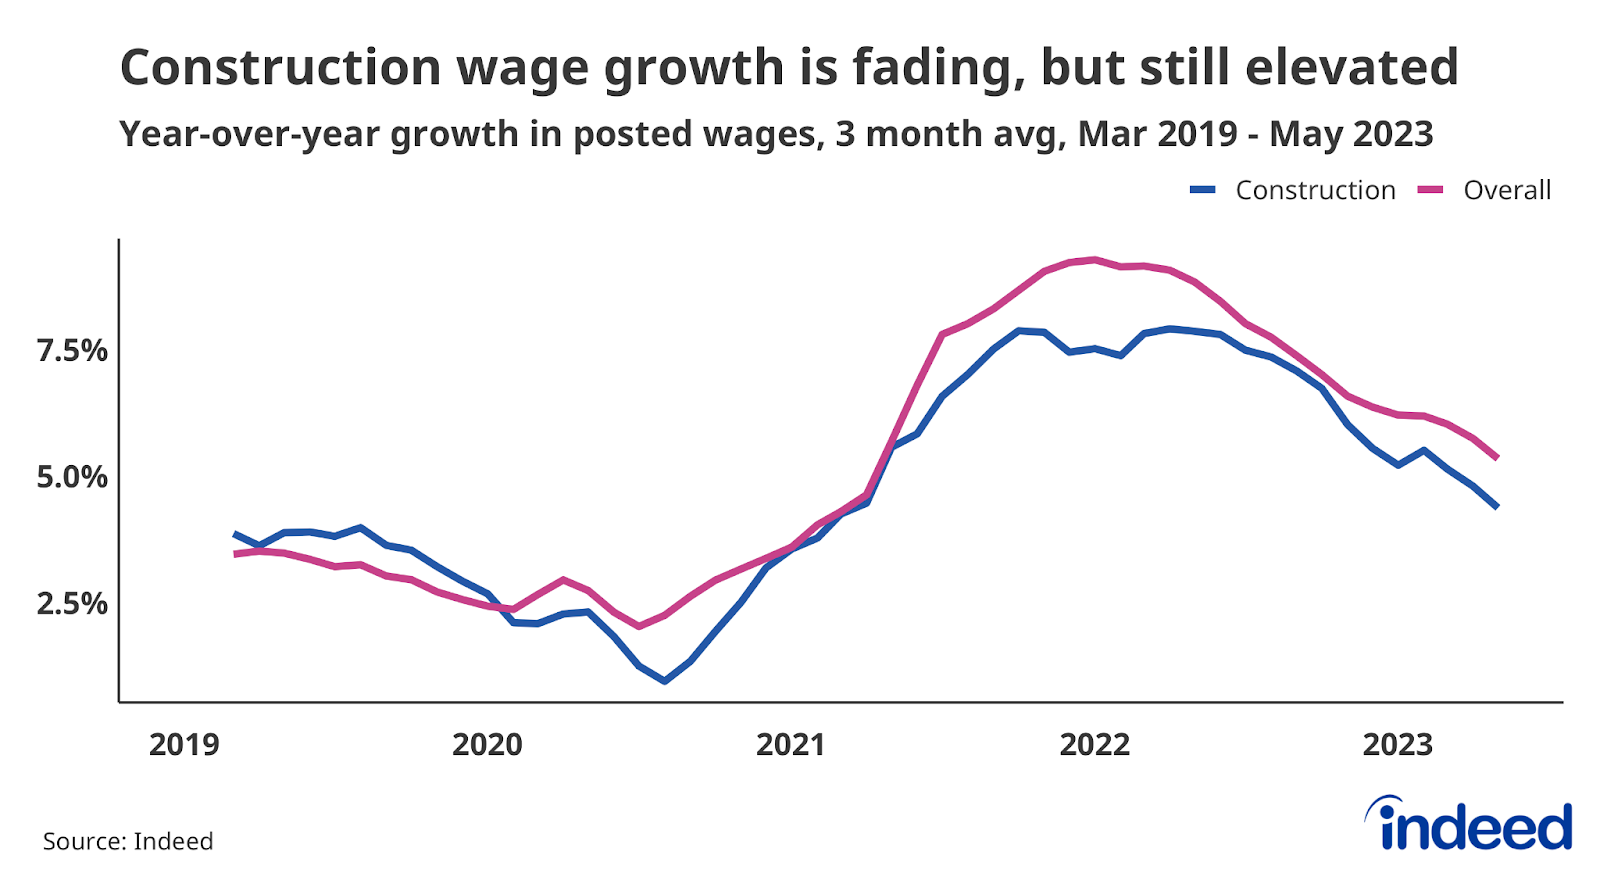 Line graph titled “Construction wage growth is fading, but still elevated” with a vertical axis ranging from 2.5% to 7.5%. Posted wage growth for construction jobs has declined since early 2022, in line with the overall trend. Despite this decline, wage growth for construction workers still remains well above the averages seen prior to 2020.